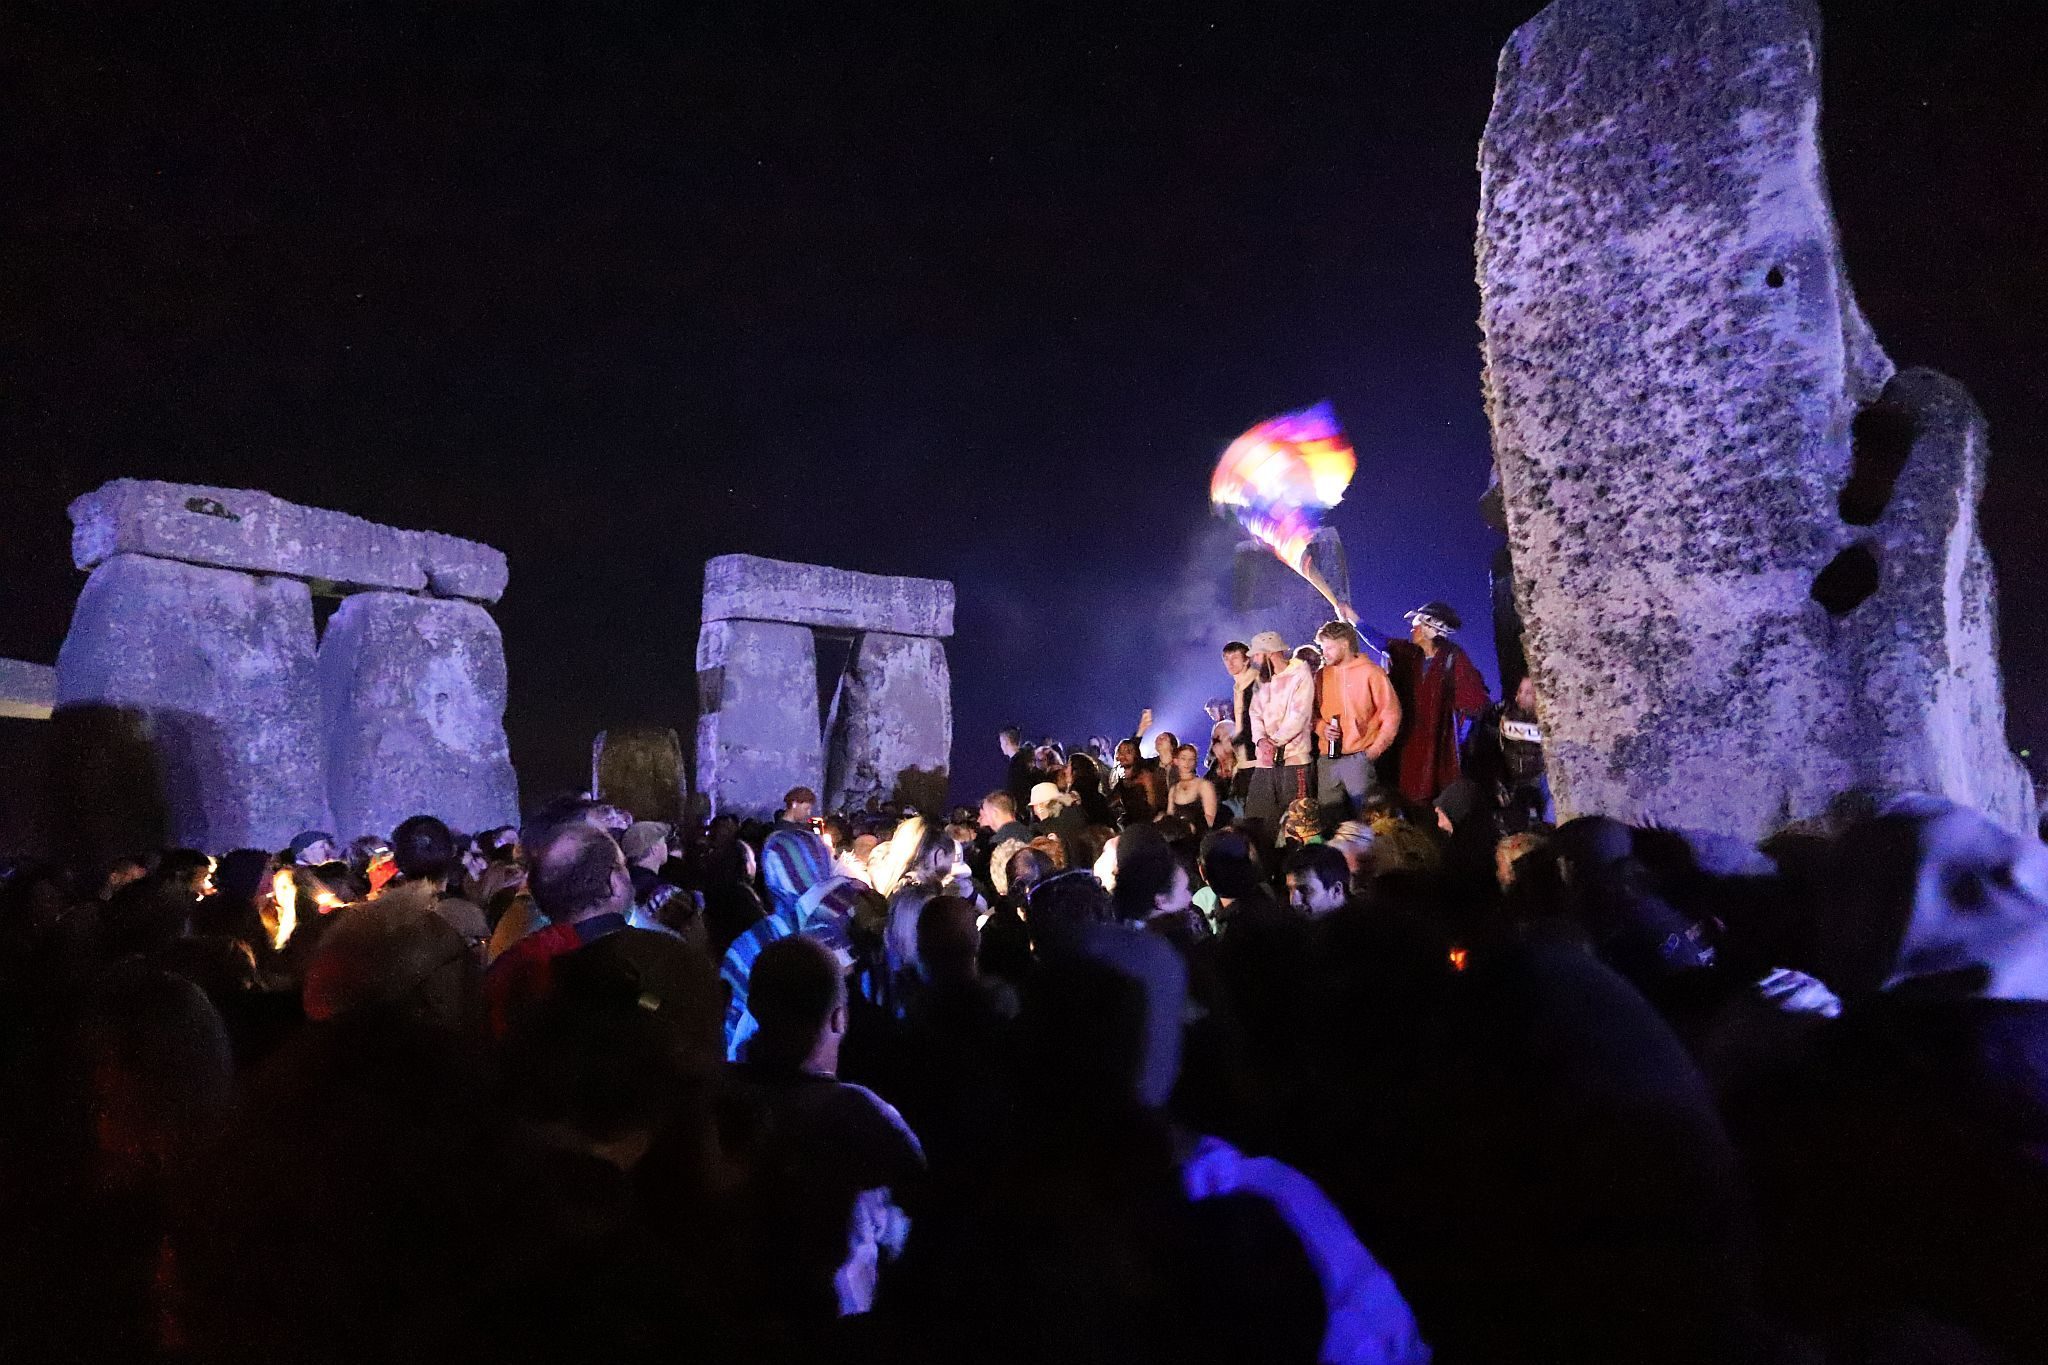 The centre of the stones. The 2023 Summer Solstice longest day at Stonehenge in Wiltshire, UK. Photo taken 21-Jun-2023.